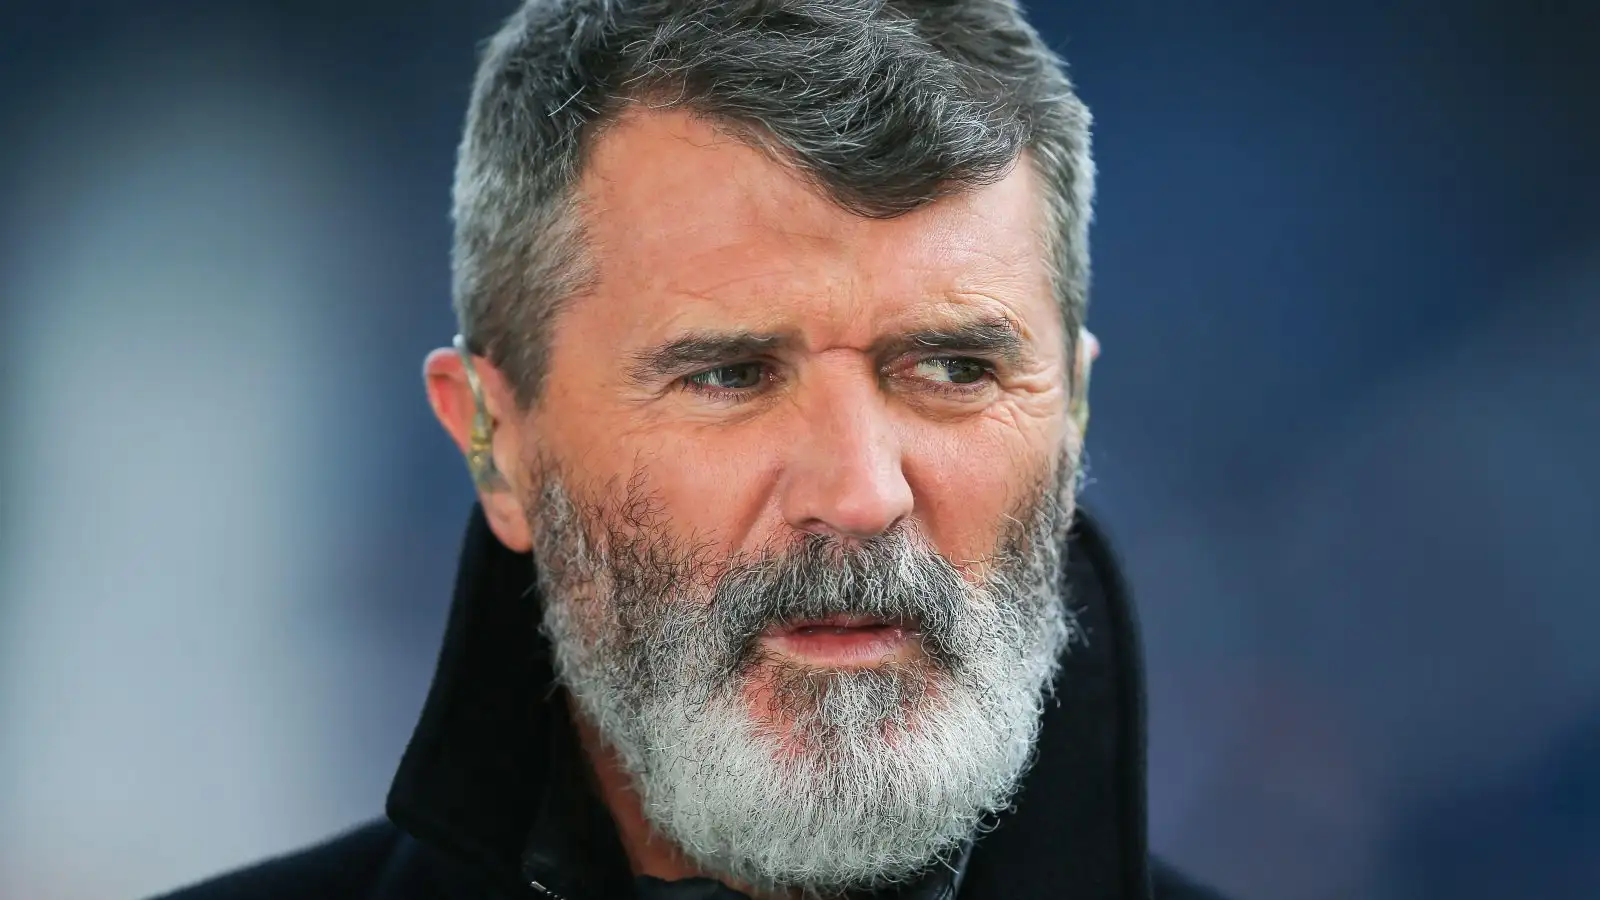 Keane questions Solskjaer over claim Man Utd player was a ‘seven out of ten every time’